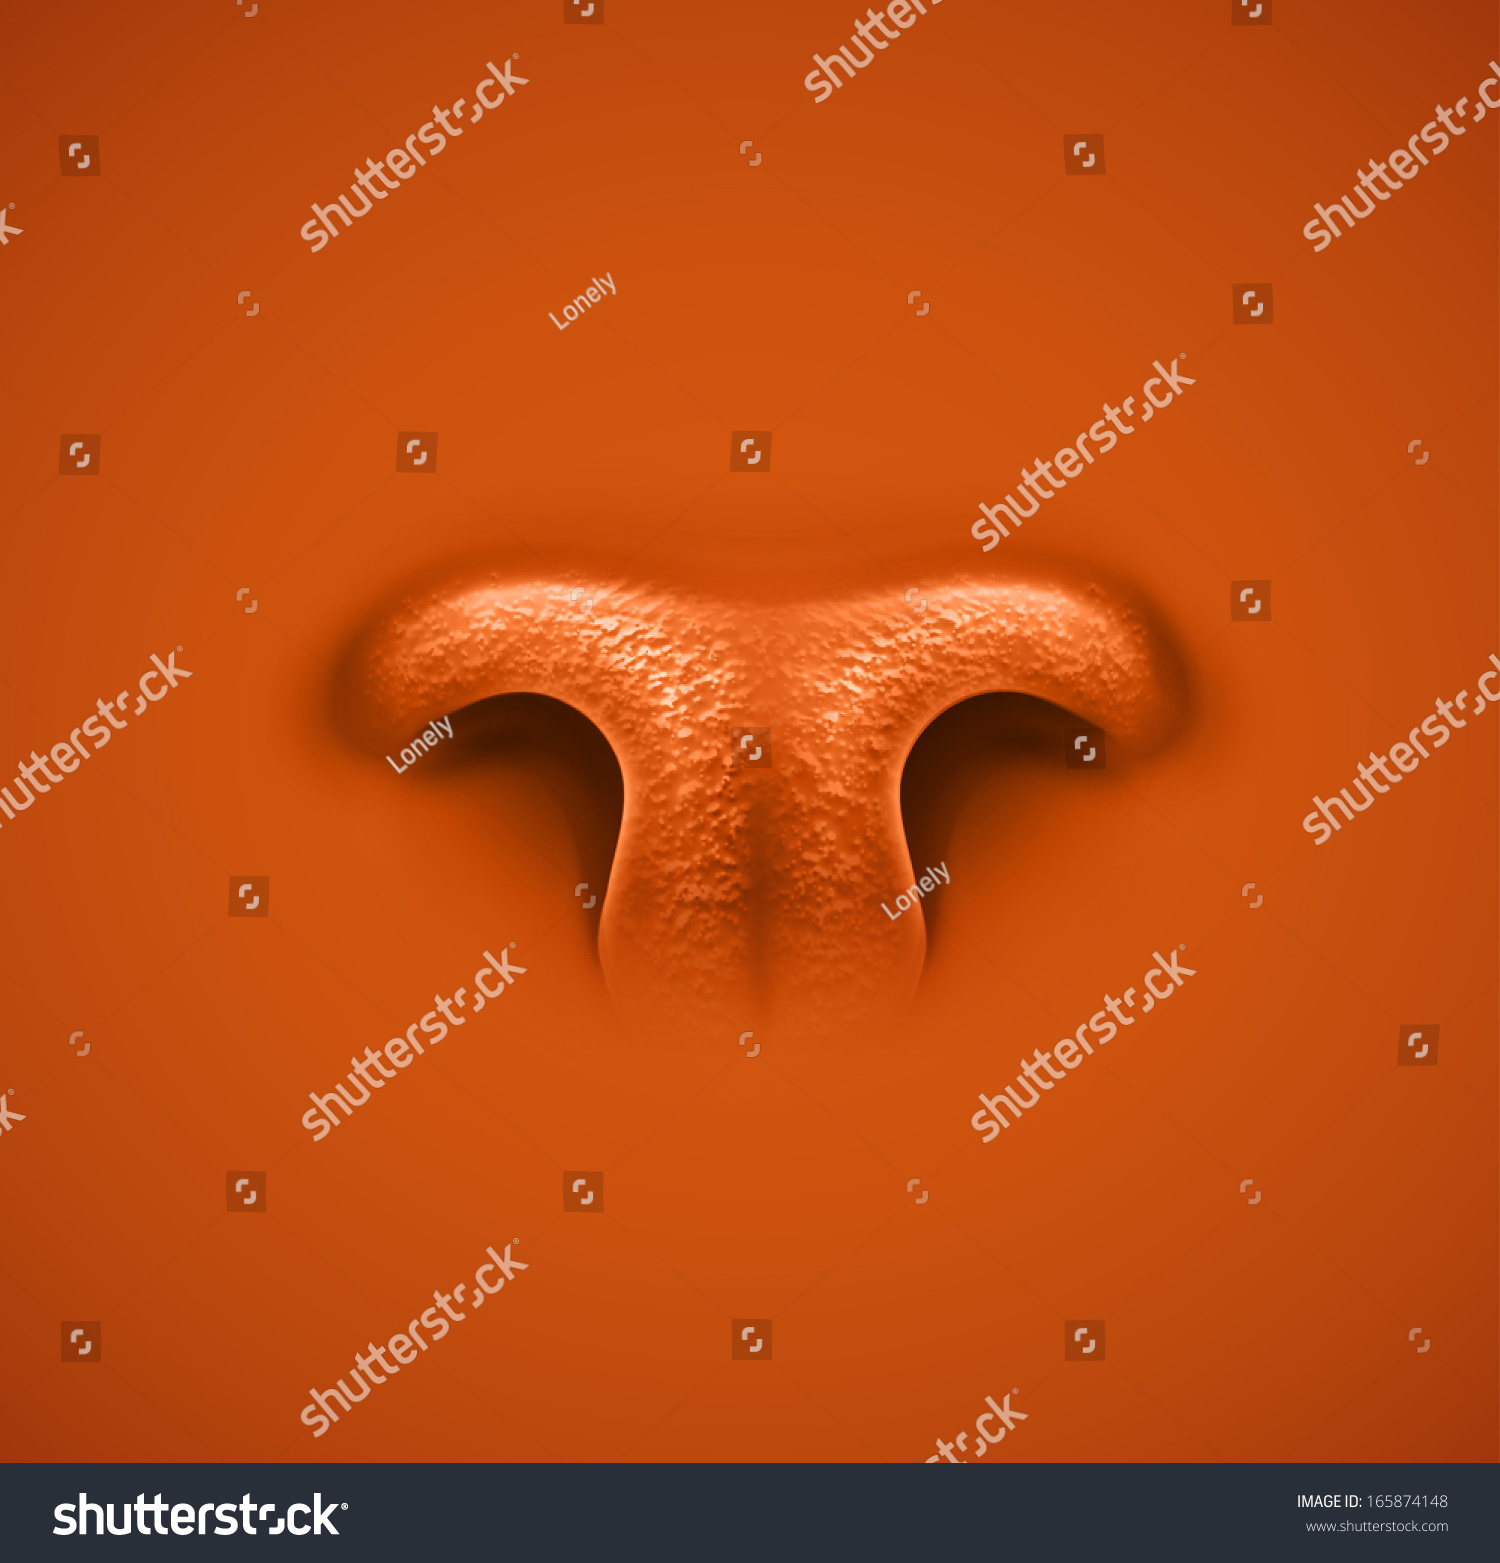 Isolated Animal'S Nose. Illustration Contains Transparency And Blending